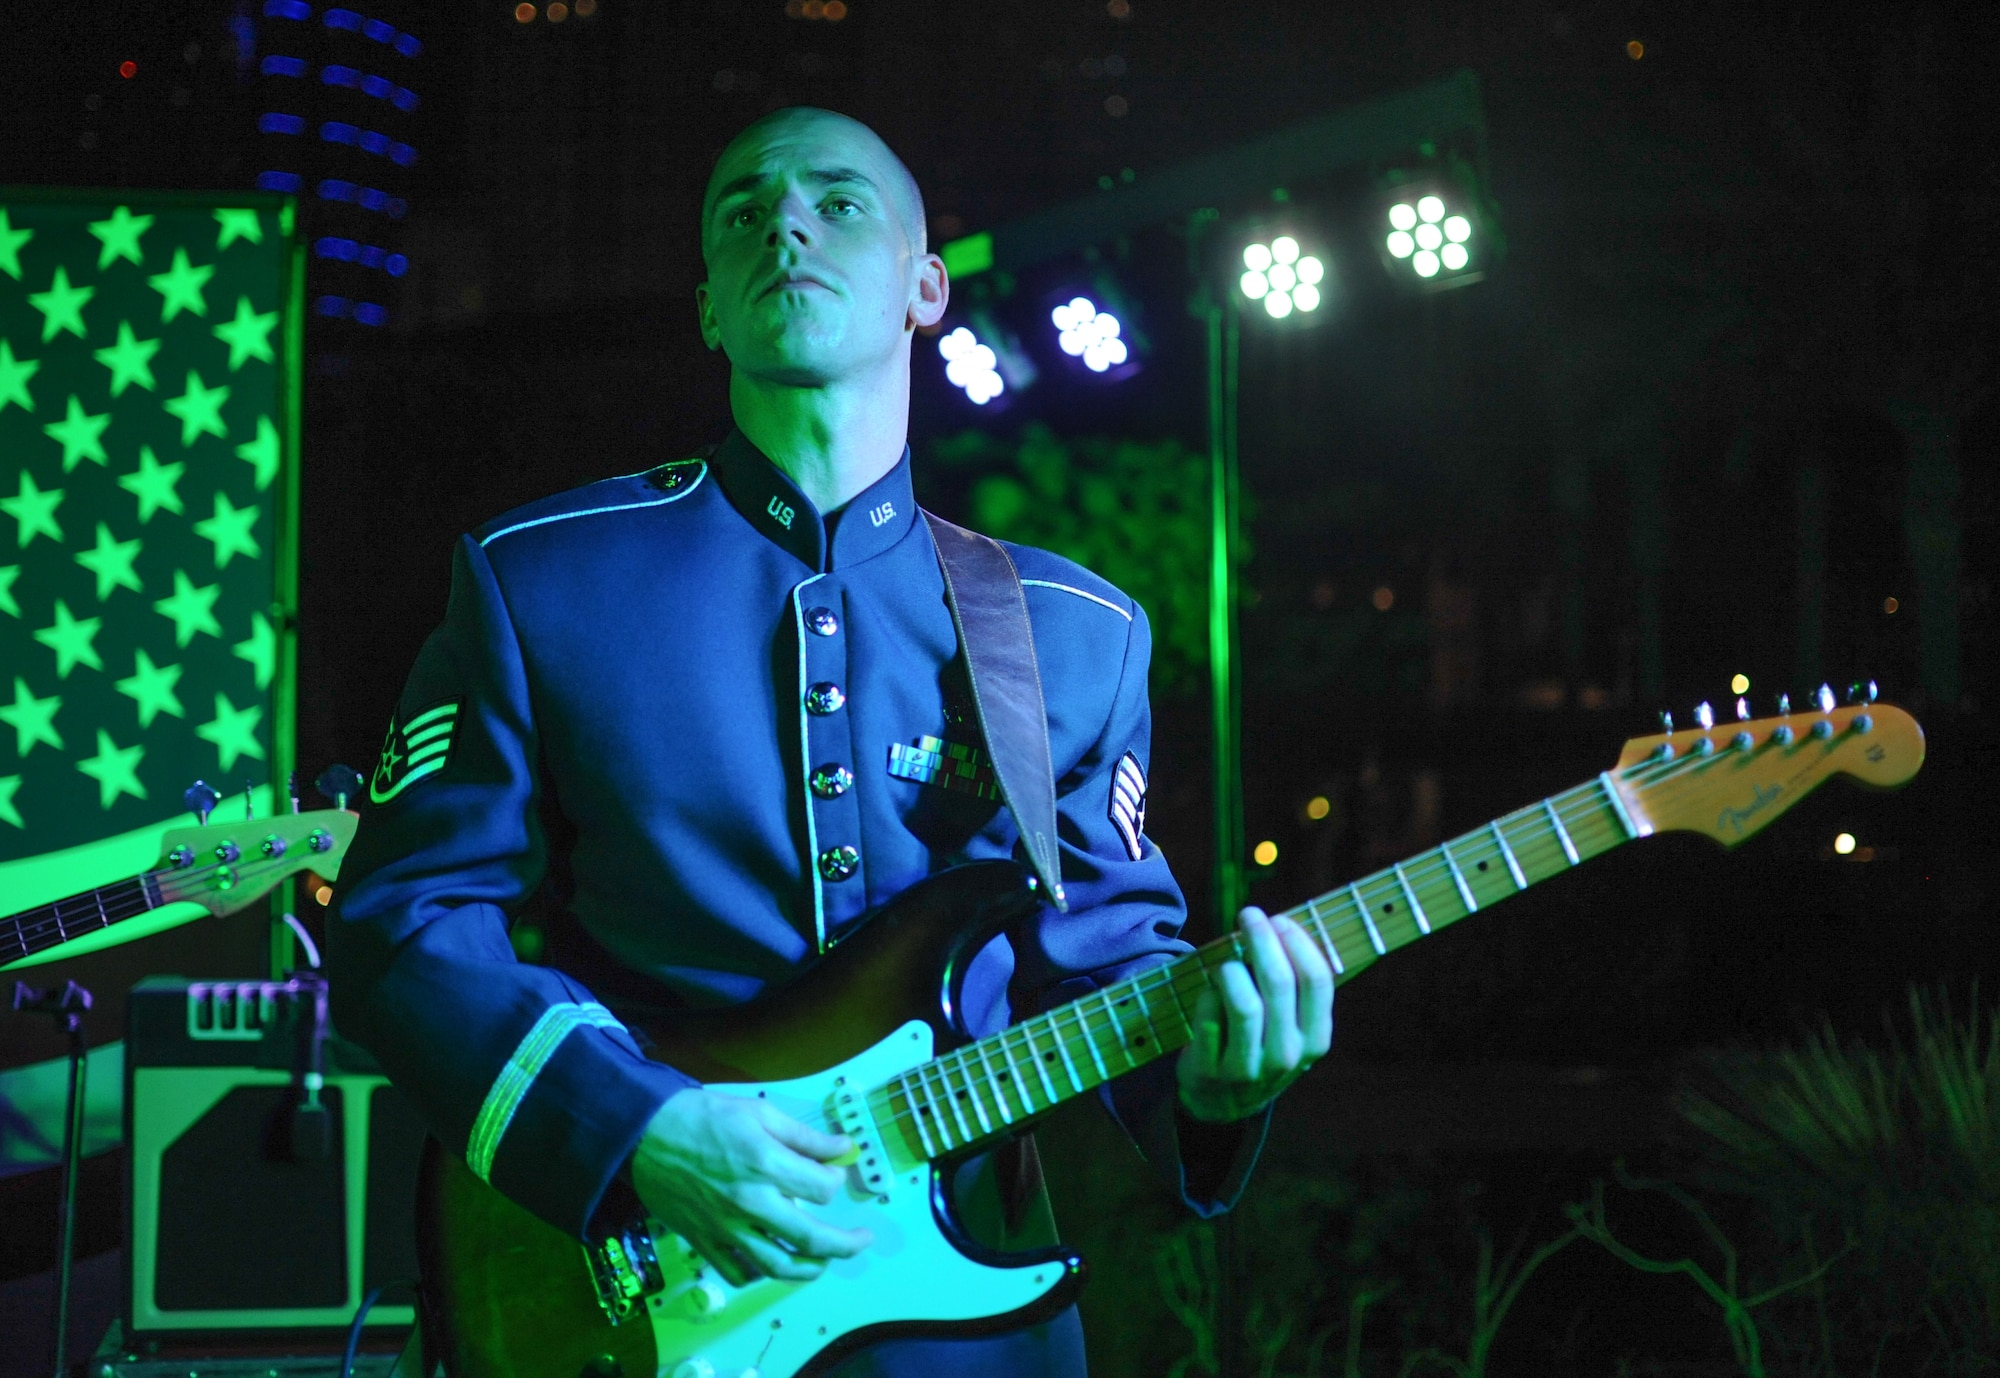 U.S Air Force Staff Sgt. Andrew Thompson, U.S. Air Forces Central Command band member performs during the United States National Day March 7, 2018 at the Ritz-Carlton Hotel and Resort, Dubai. The band collaborates with U.S. Embassies throughout southwest Asia to share American culture, build partnerships and develop relationships. (U.S. Air National Guard Photo by Staff Sgt. Colton Elliott)